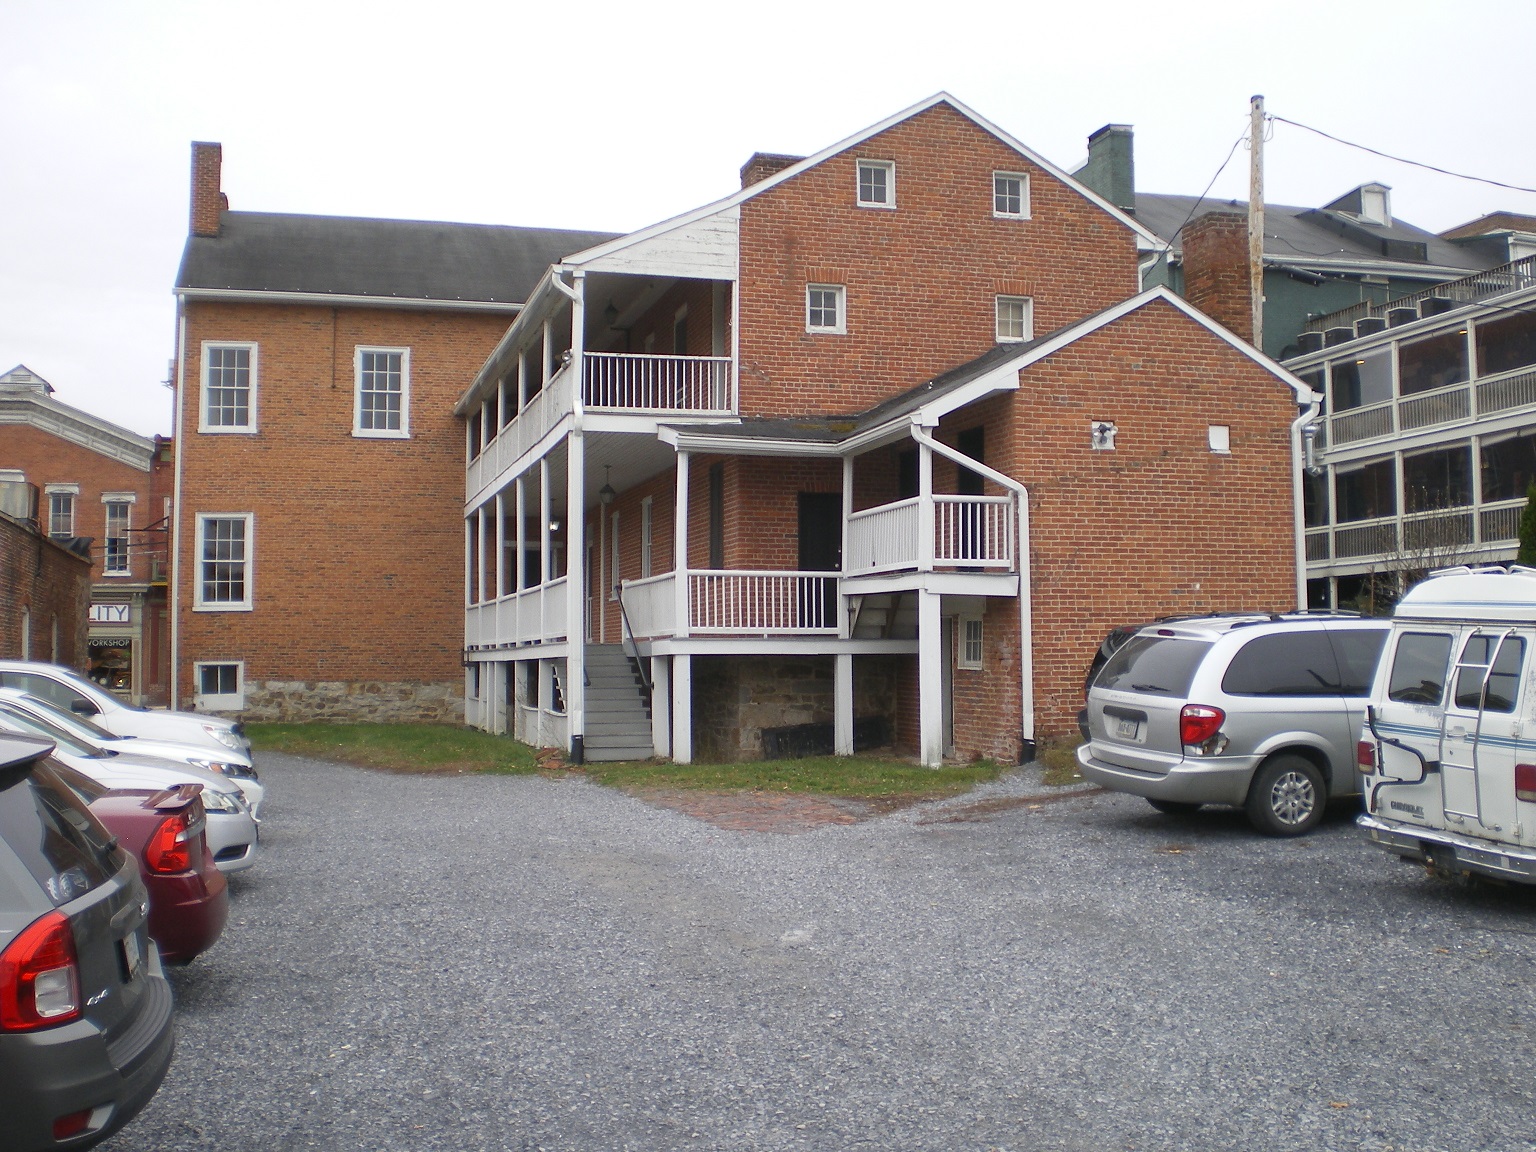 This photograph shows the multi-story rear porches on the Anderson House.